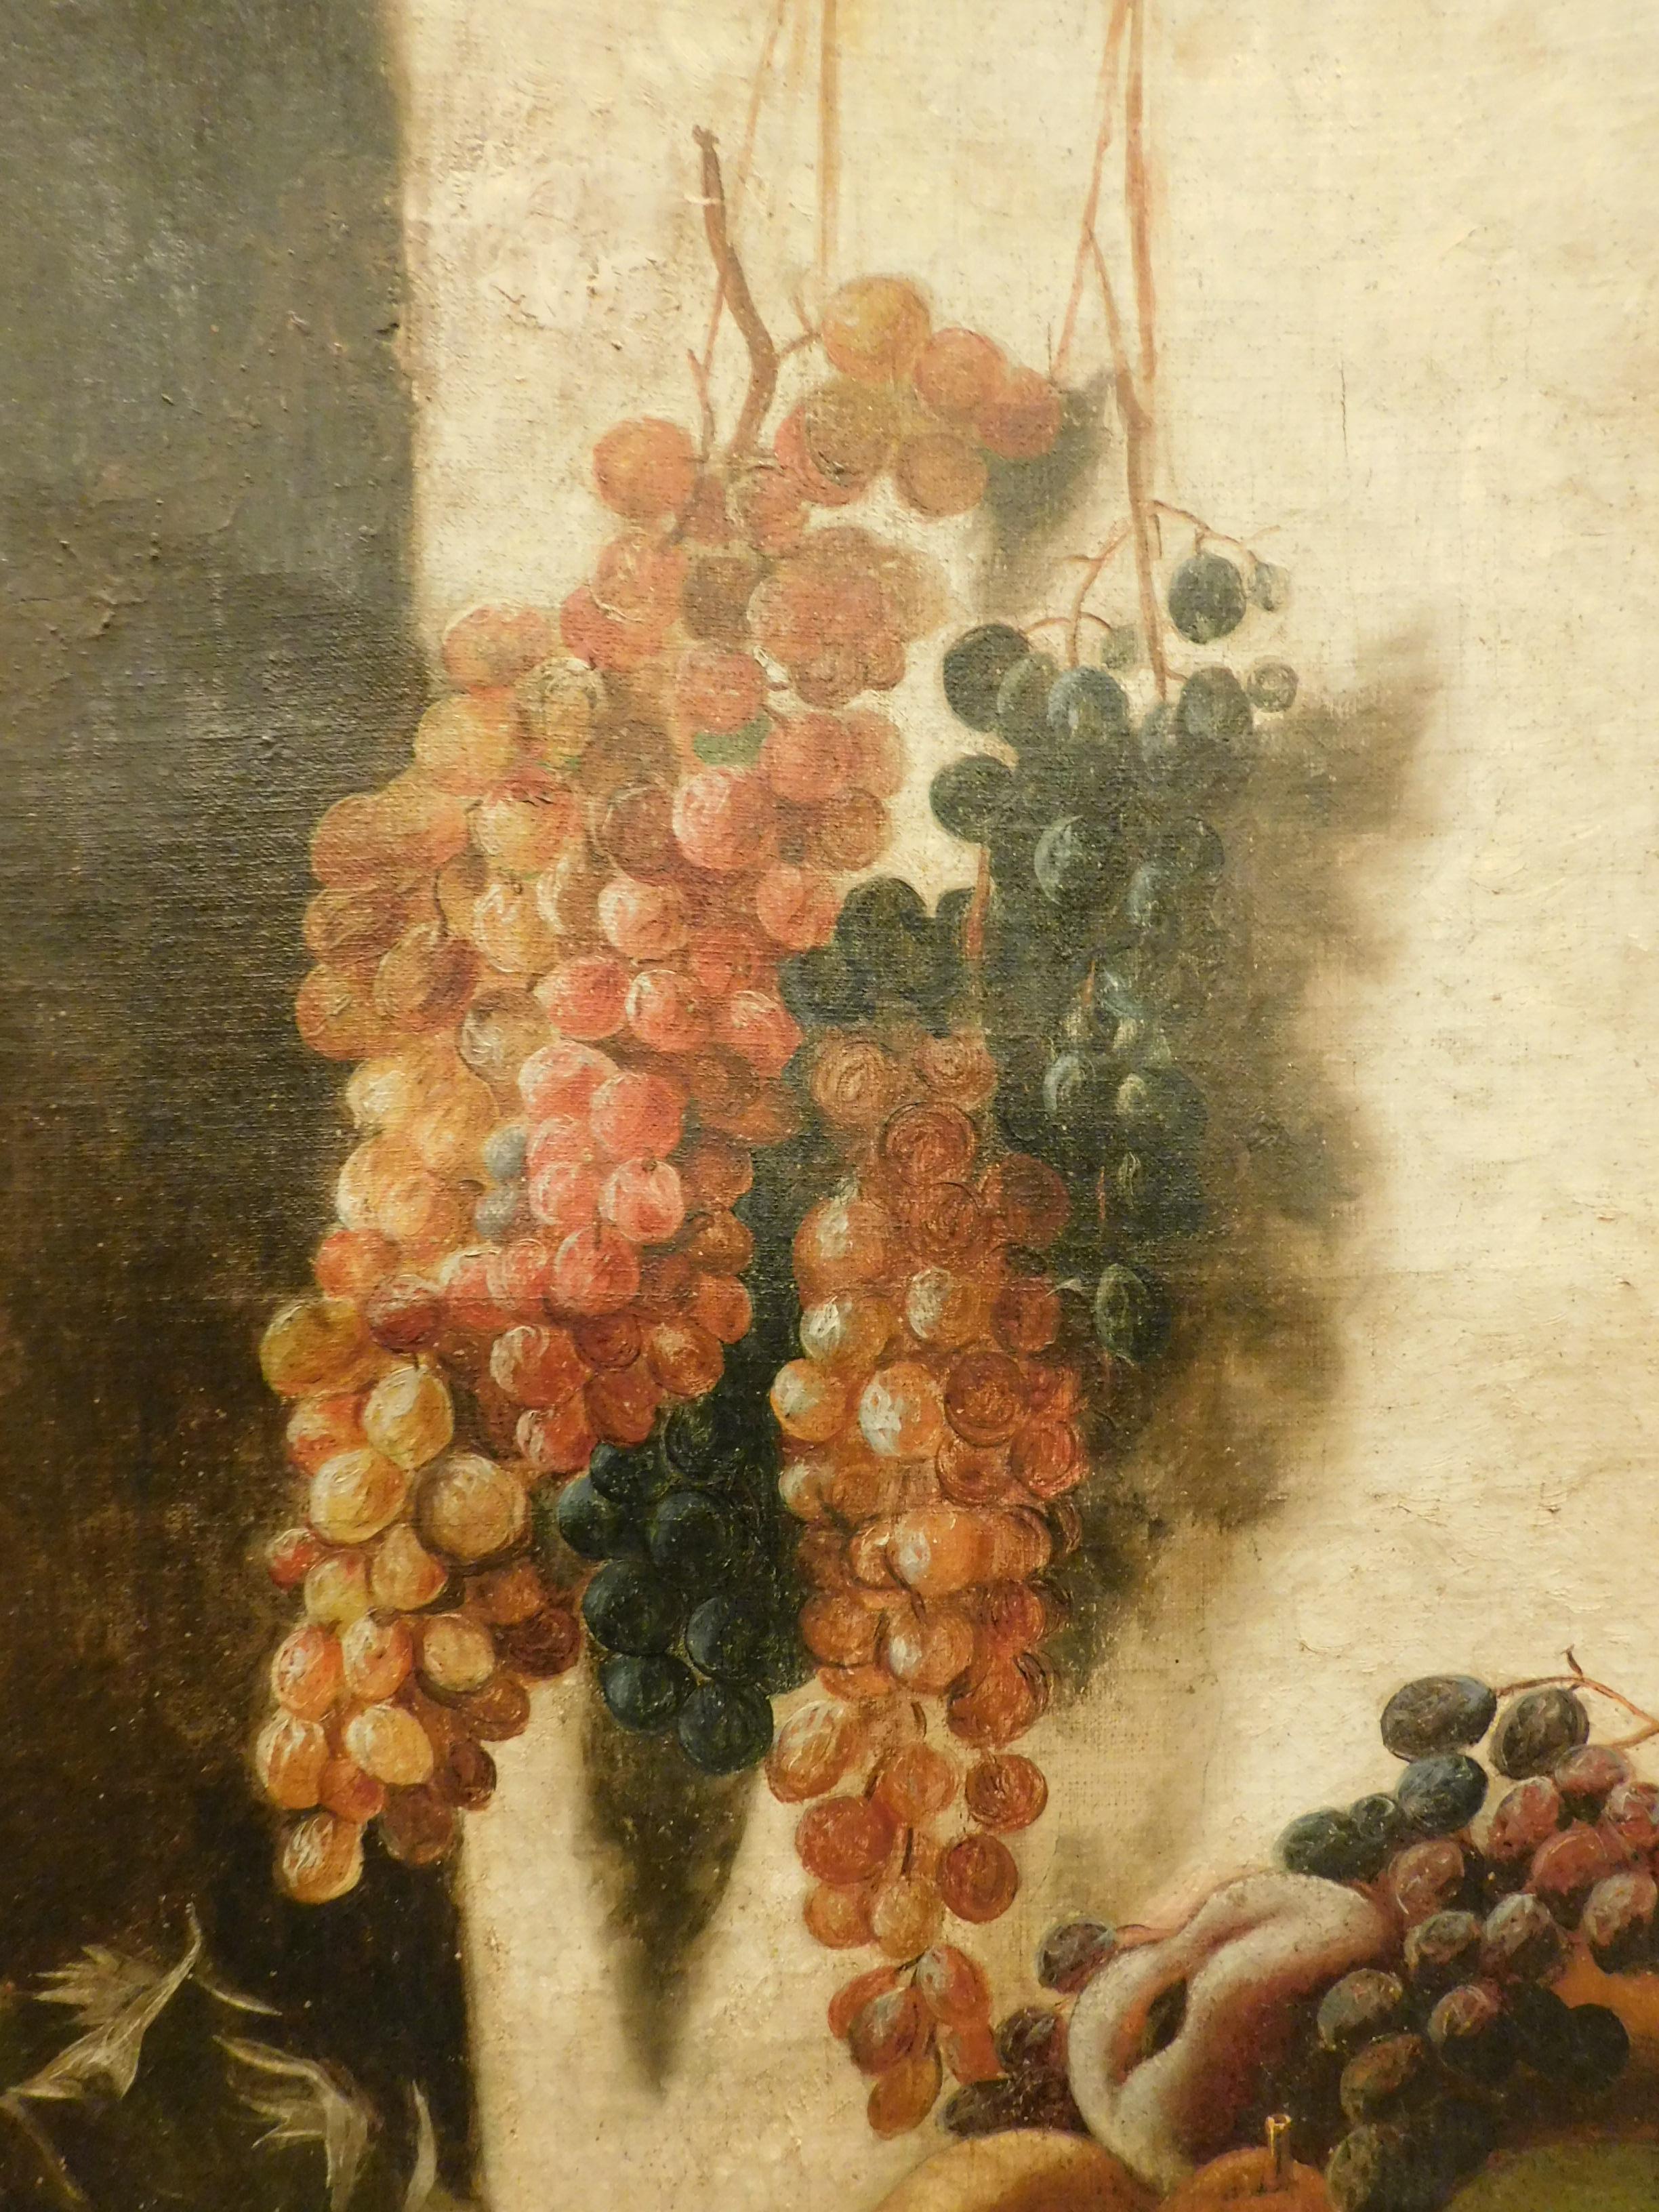 Hand-Painted Antiqueo Painting Oil on Canvas, Still Life, 19th Century Italy